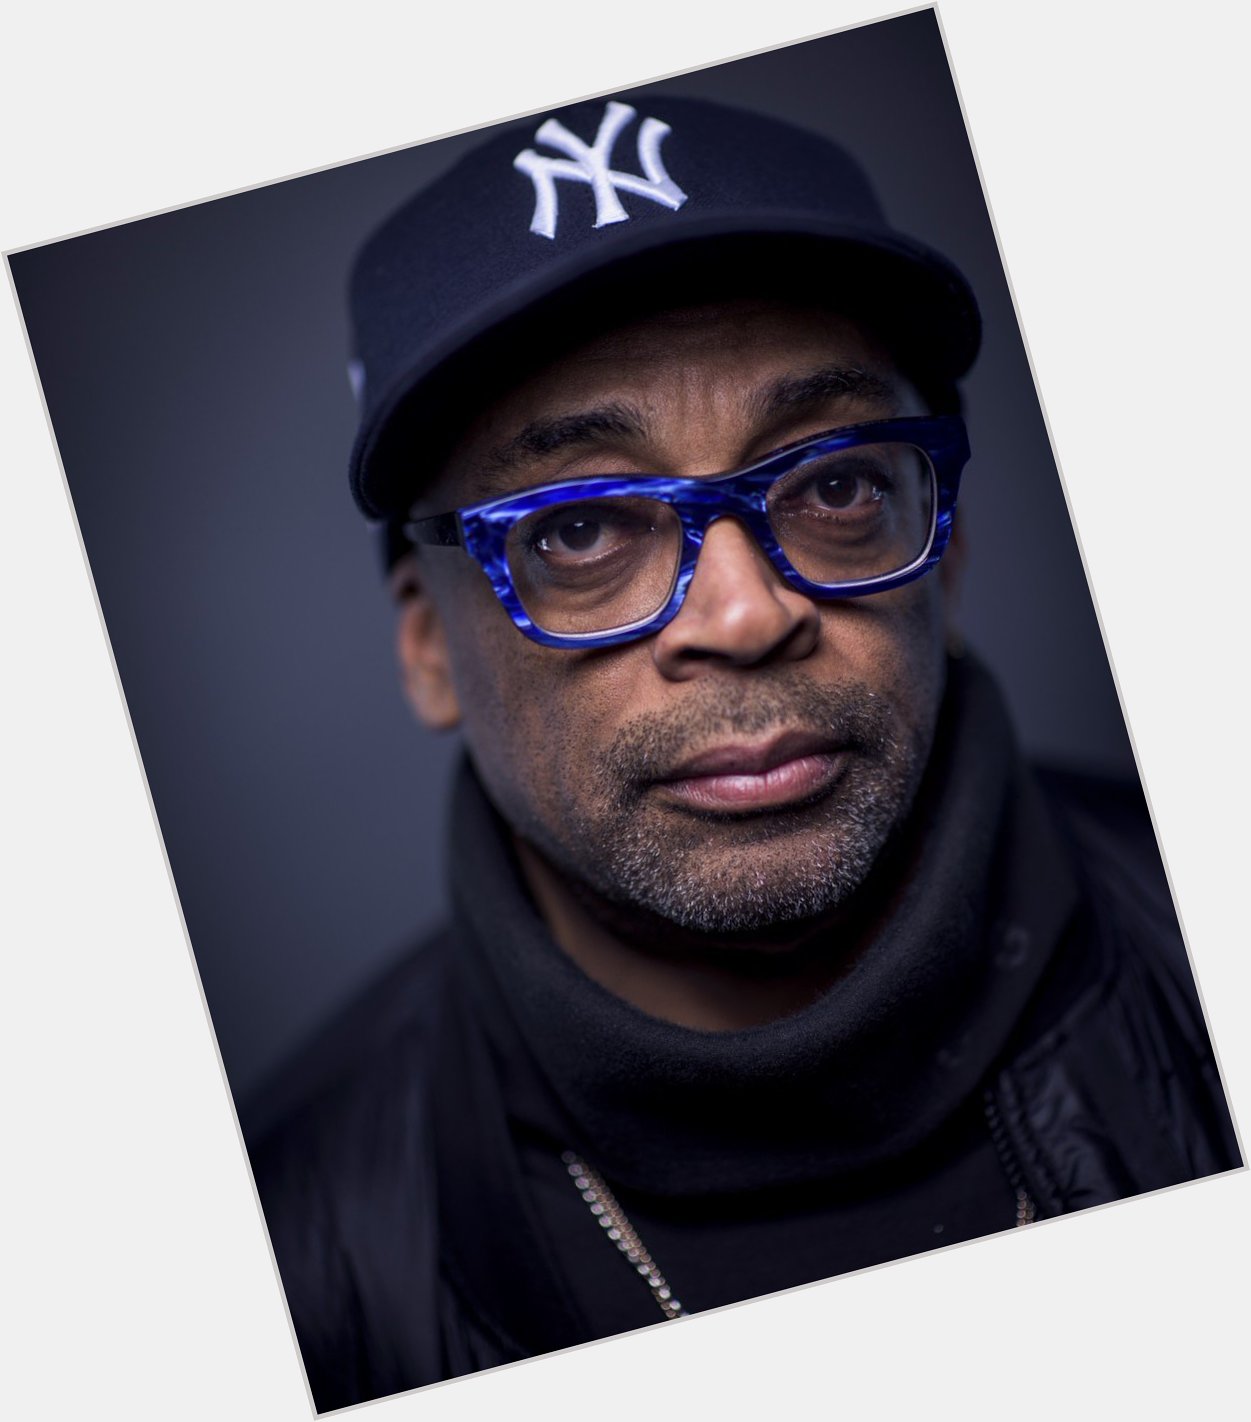  Make the moral choice between love versus hate.  Spike Lee

Wishing the iconic filmmaker a very Happy Birthday 